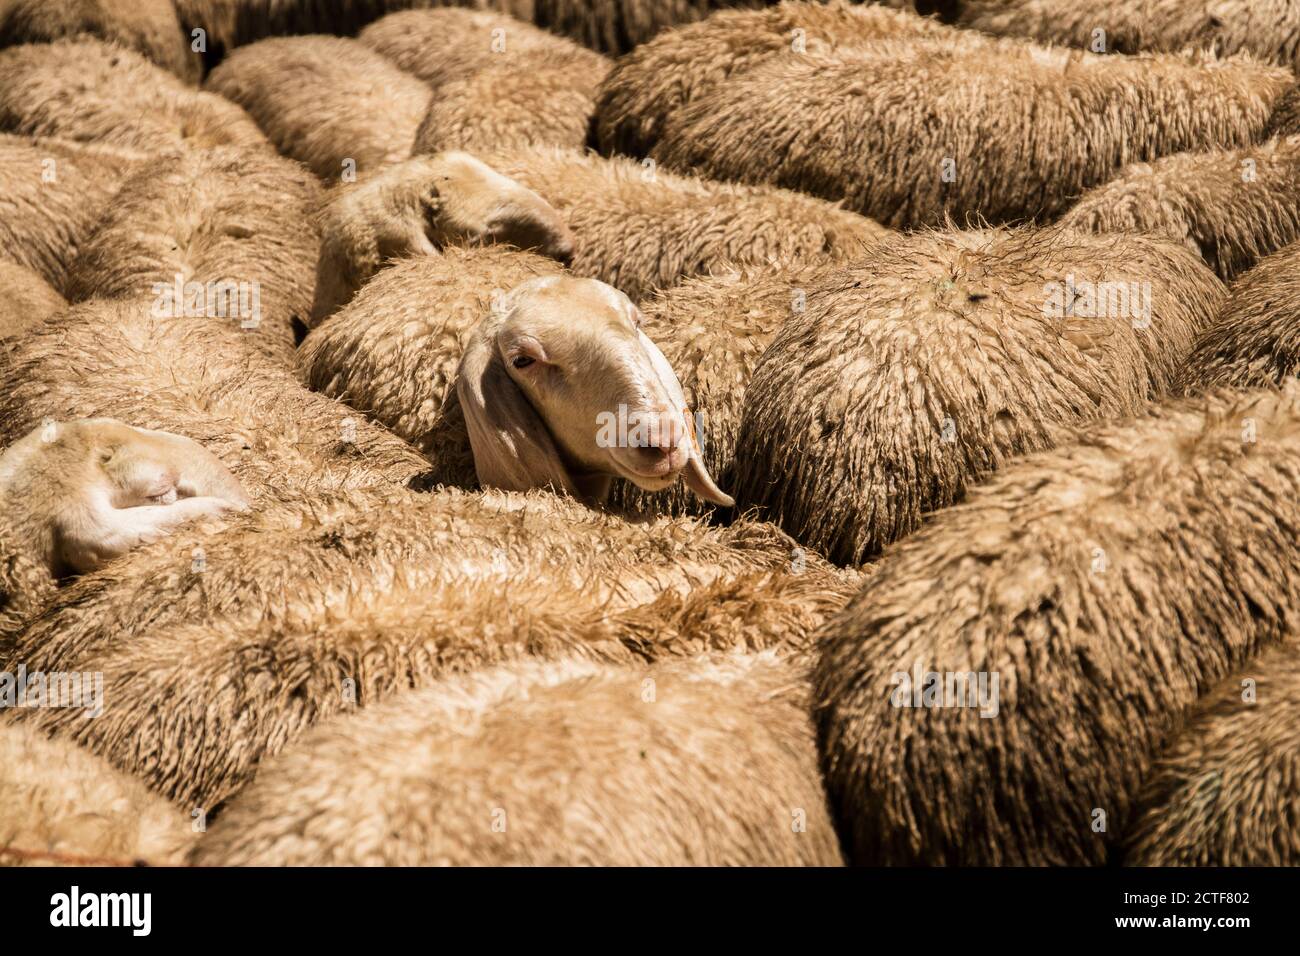 Close-up on a sheep raising his head in the middle of his flock Stock Photo